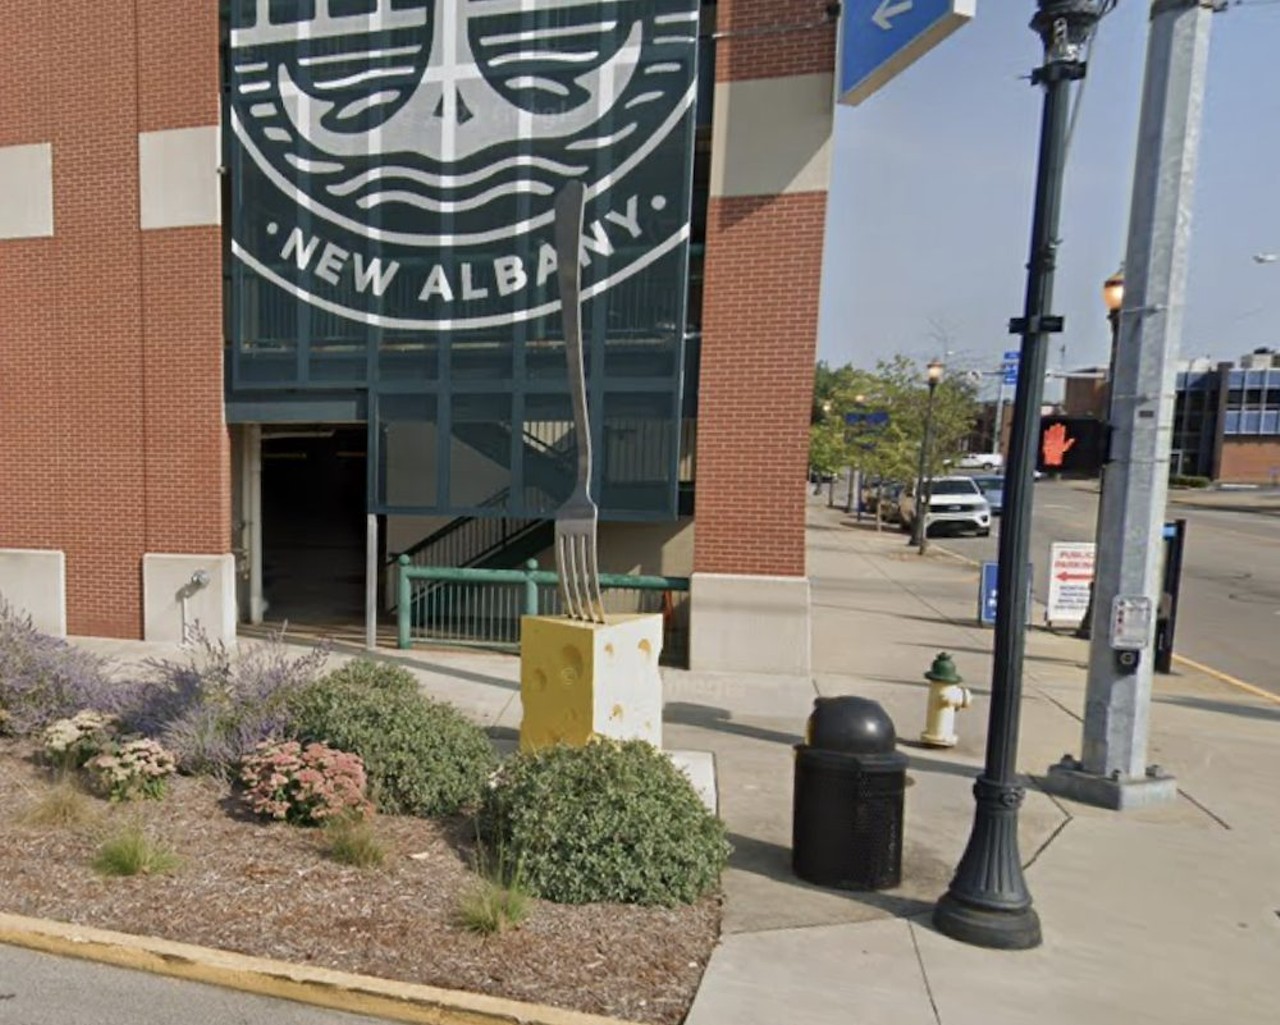 Fork in the Road
West Market Street, New Albany, Indiana
This Fork in the Road statue, created by artist David Thrasher, used to literally be stuck in a median in the middle of Market Street in New Albany. During a redesign of the street, it was moved to the sidewalk, where it&#146;s even more delightfully nonsensical. 
Photo via Google Street View